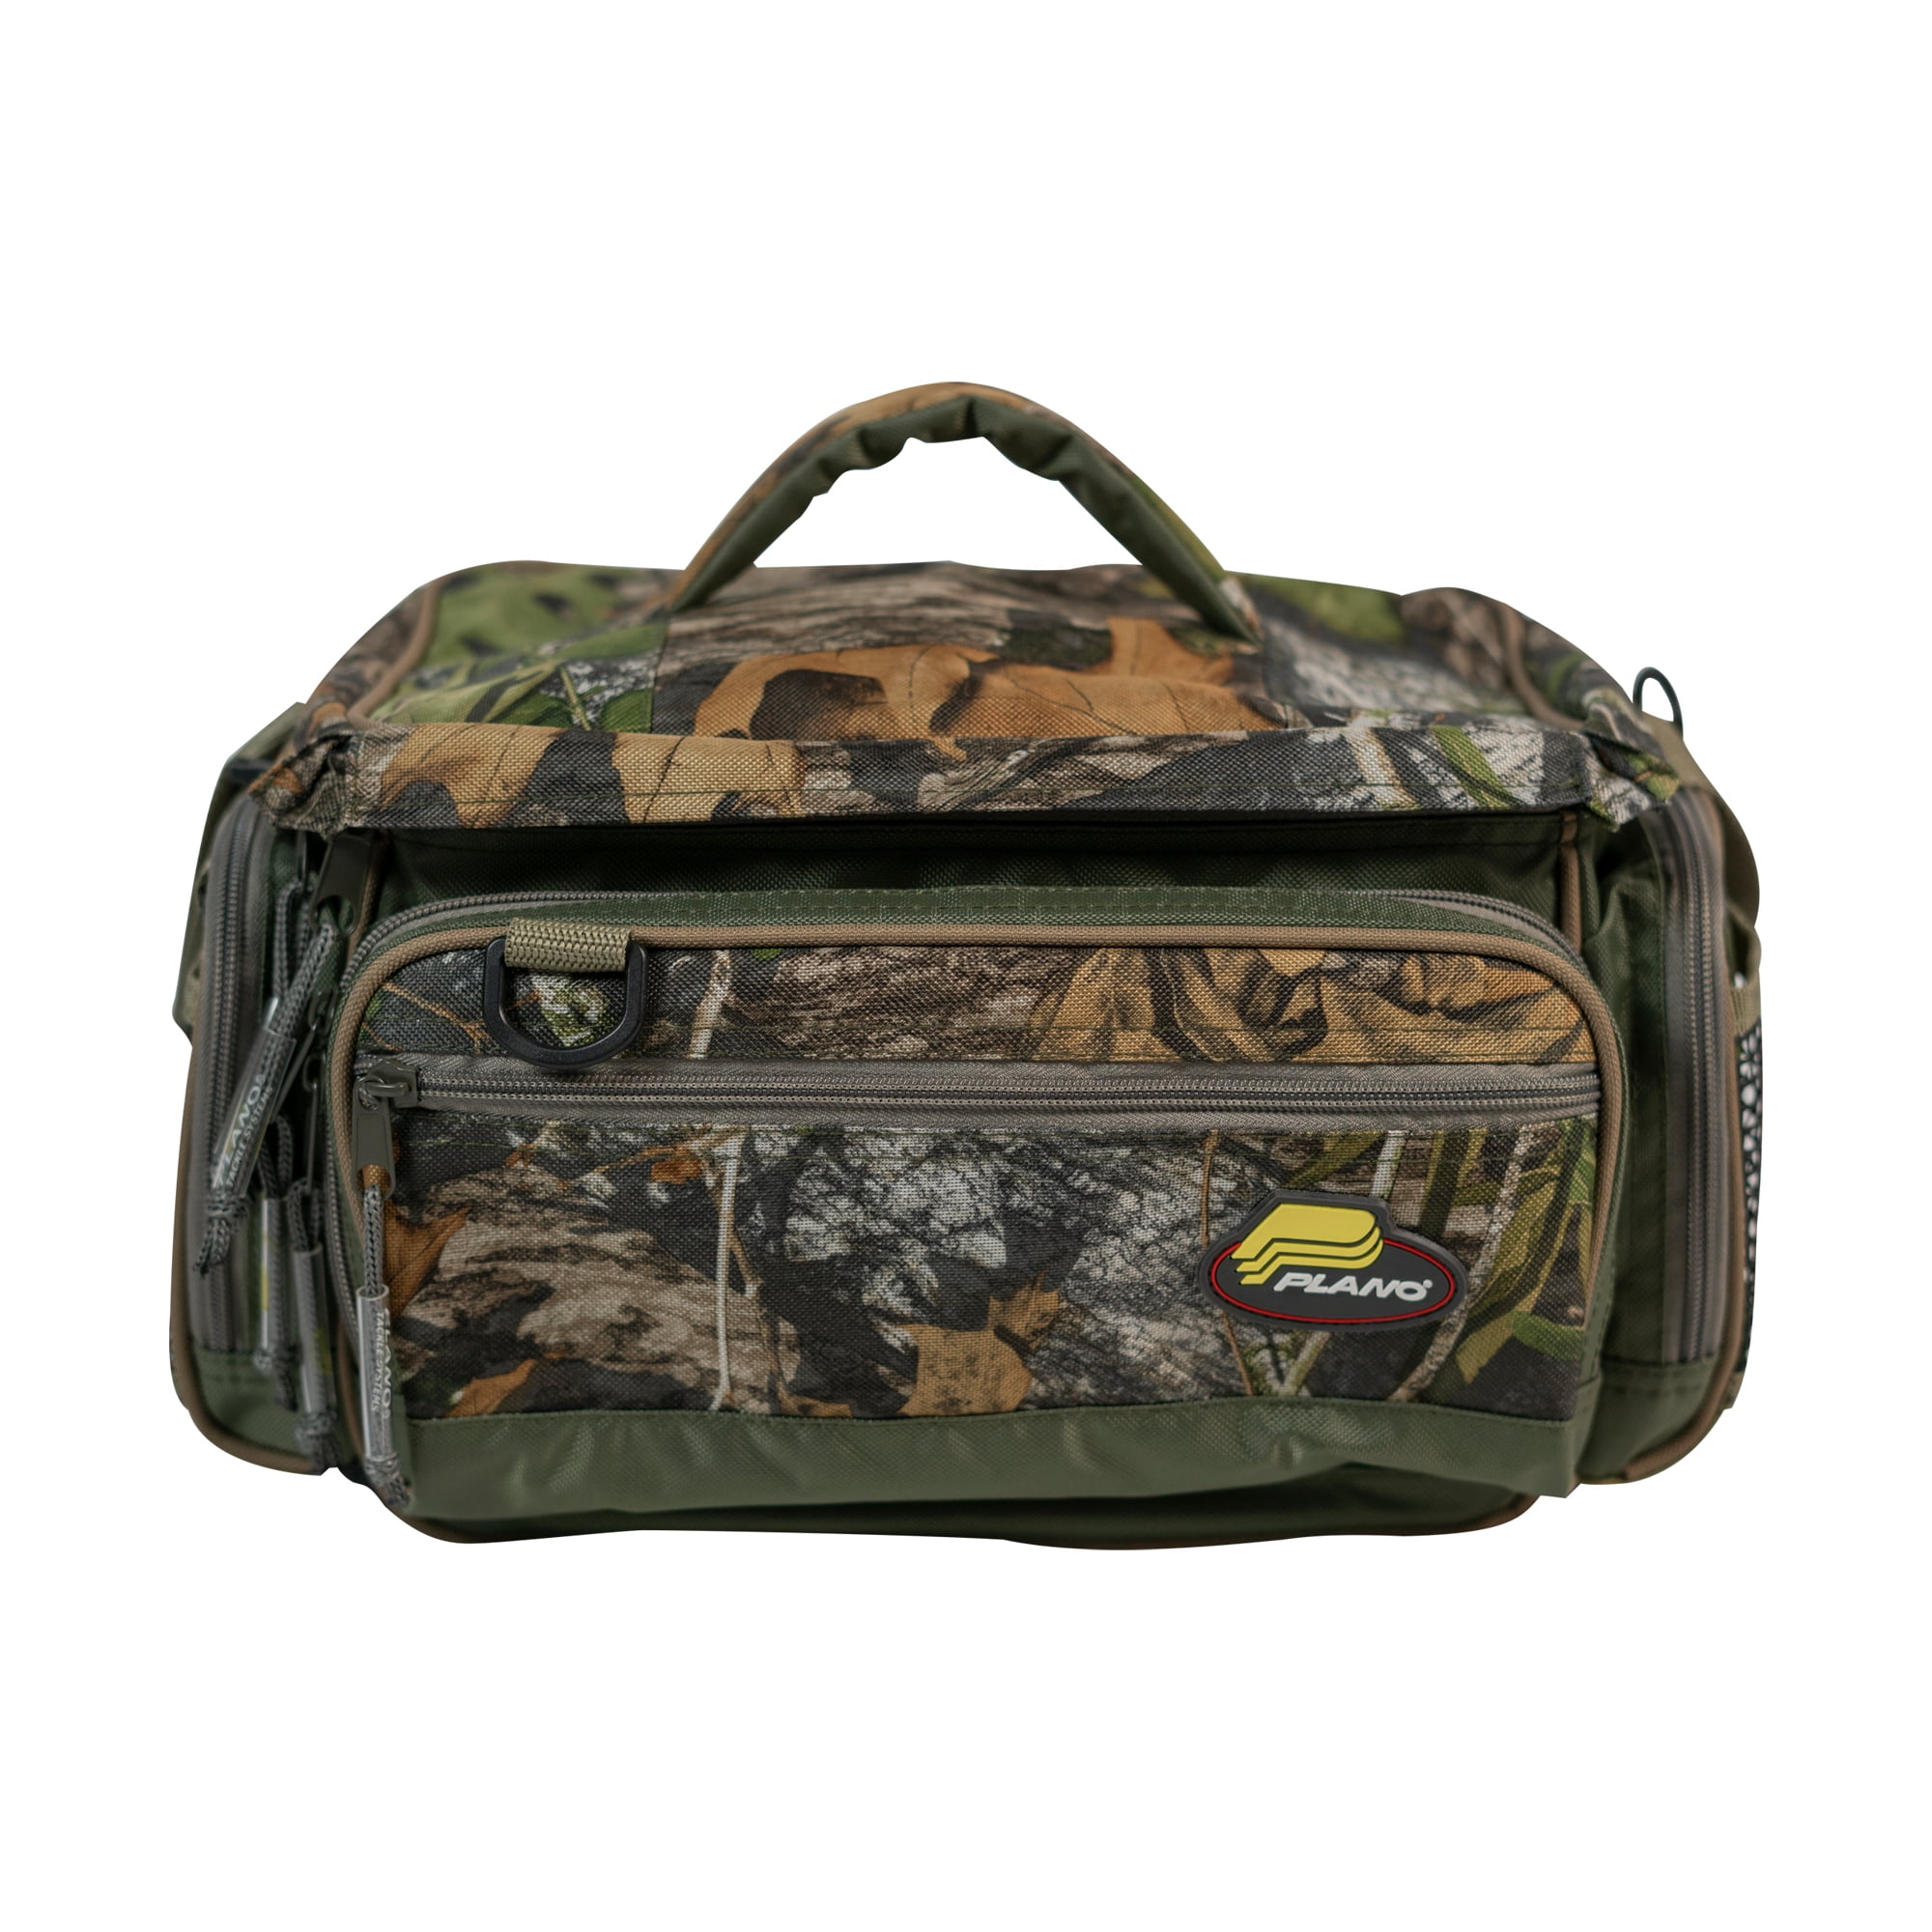 Share more than 142 plano z series tackle bag latest